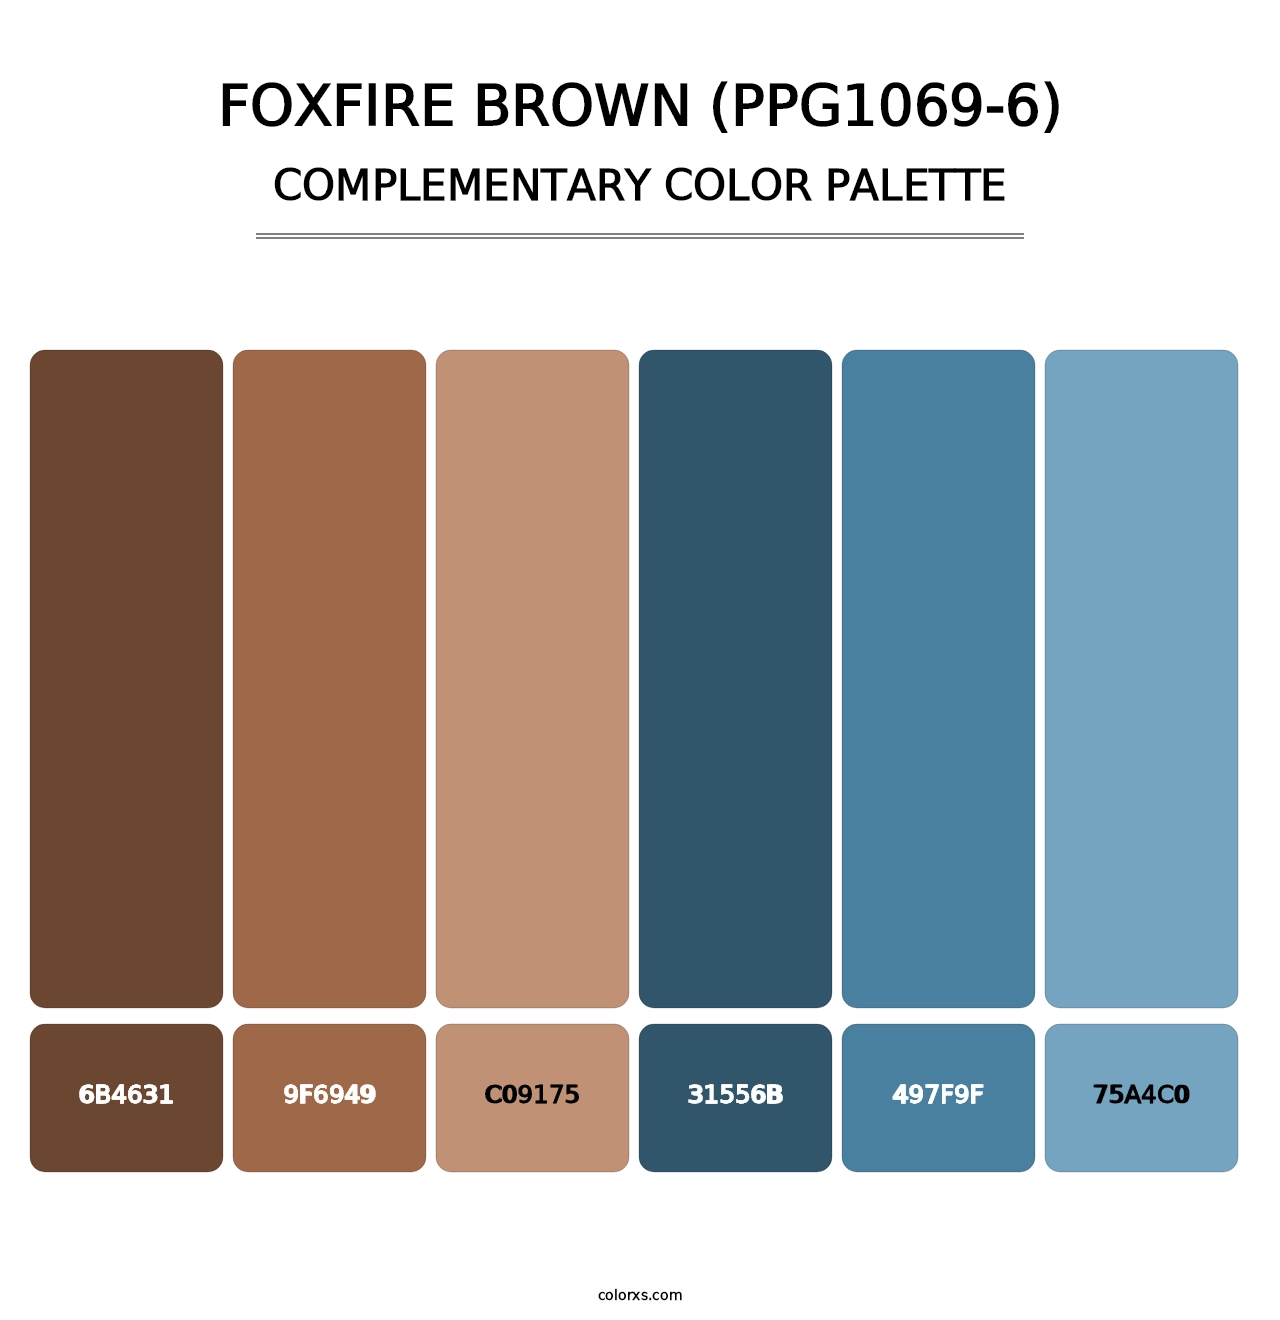 Foxfire Brown (PPG1069-6) - Complementary Color Palette